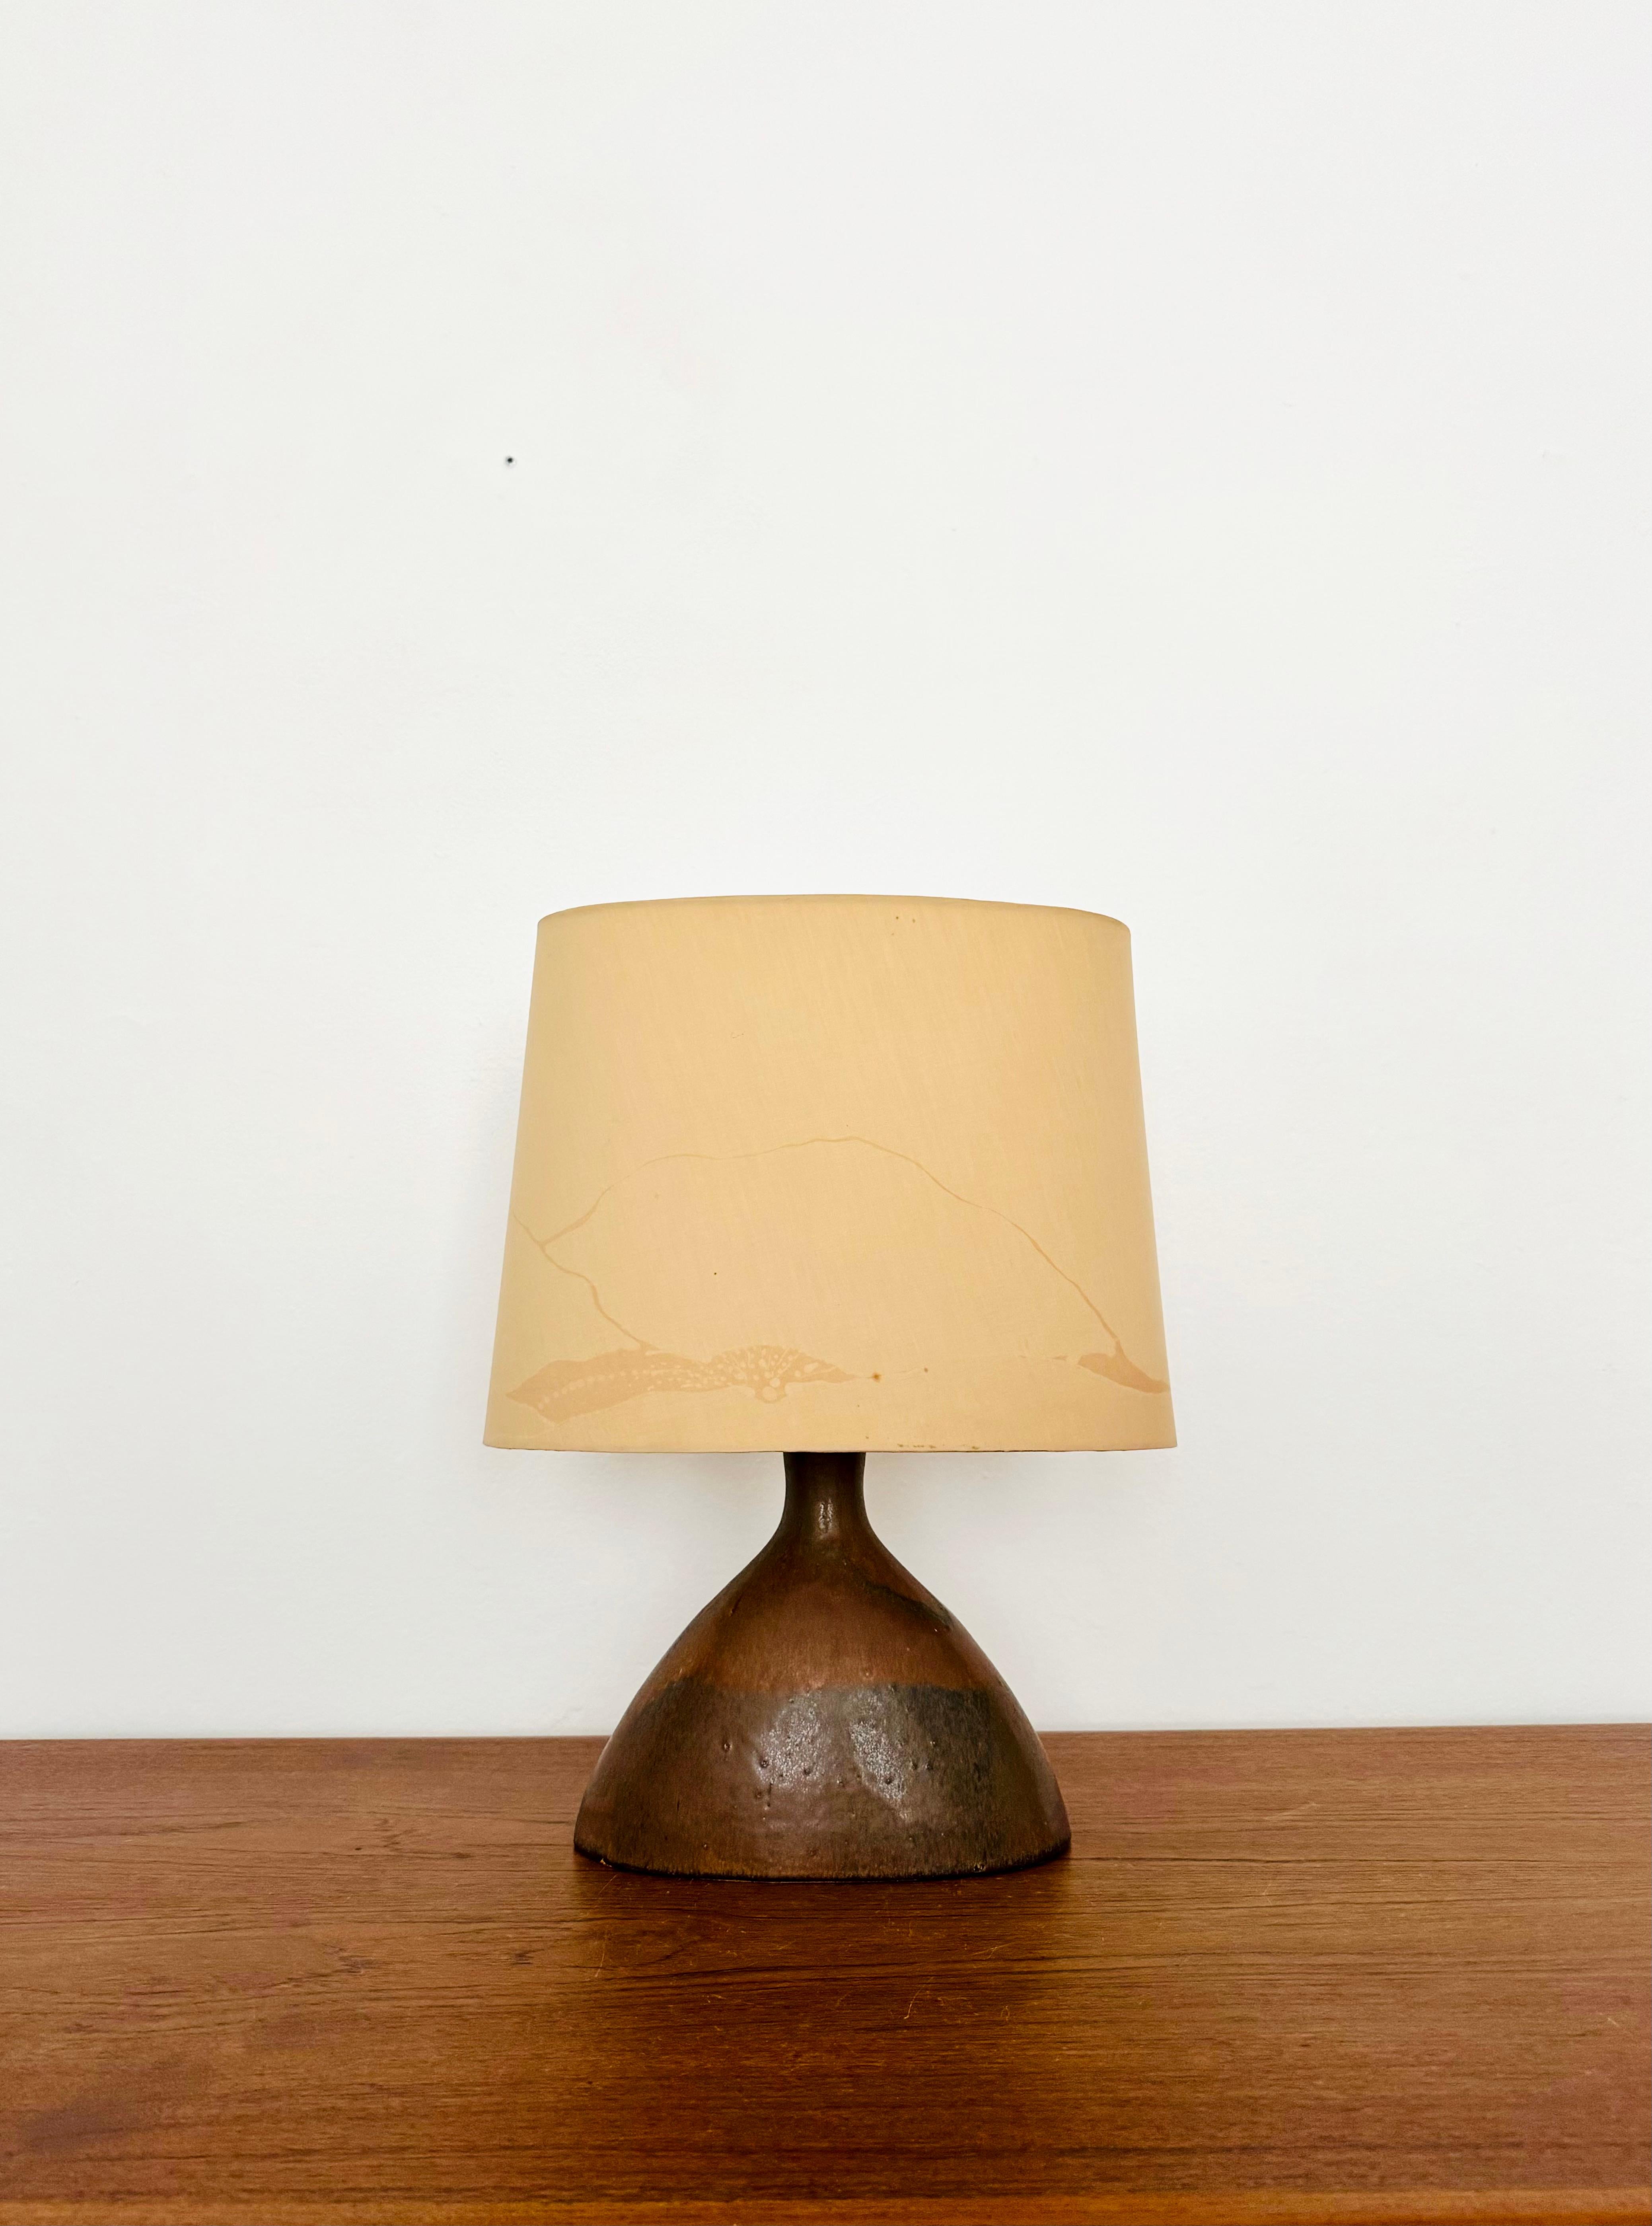 Wonderful ceramic table lamp from the 1960s.
Extremely high-quality workmanship and very beautiful design.
Exceptionally beautiful glaze.
A very cozy light is created.

Condition:

Very good vintage condition with minimal signs of wear.
A small chip